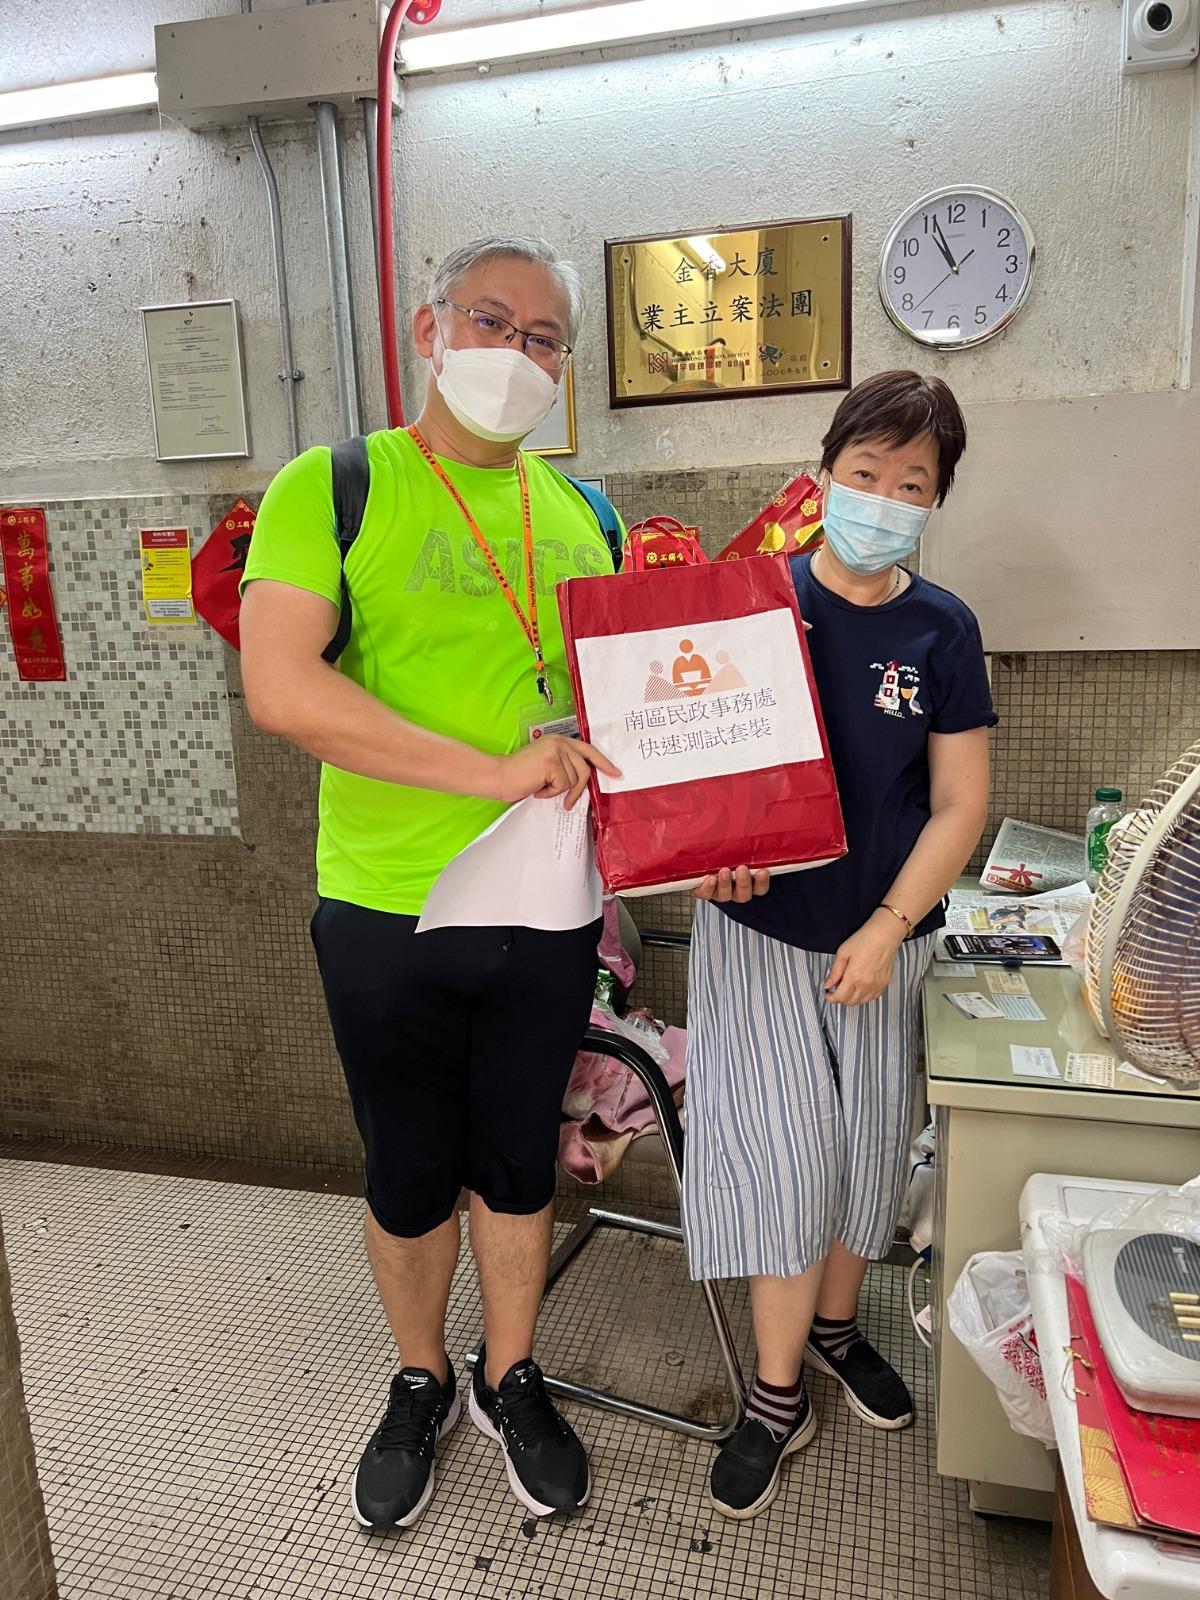 The Southern District Office distributed COVID-19 rapid test kits to households, cleansing workers and property management staff living and working in residential premises around Aberdeen Main Road and Yue Fai Road for voluntary testing through the property management company.